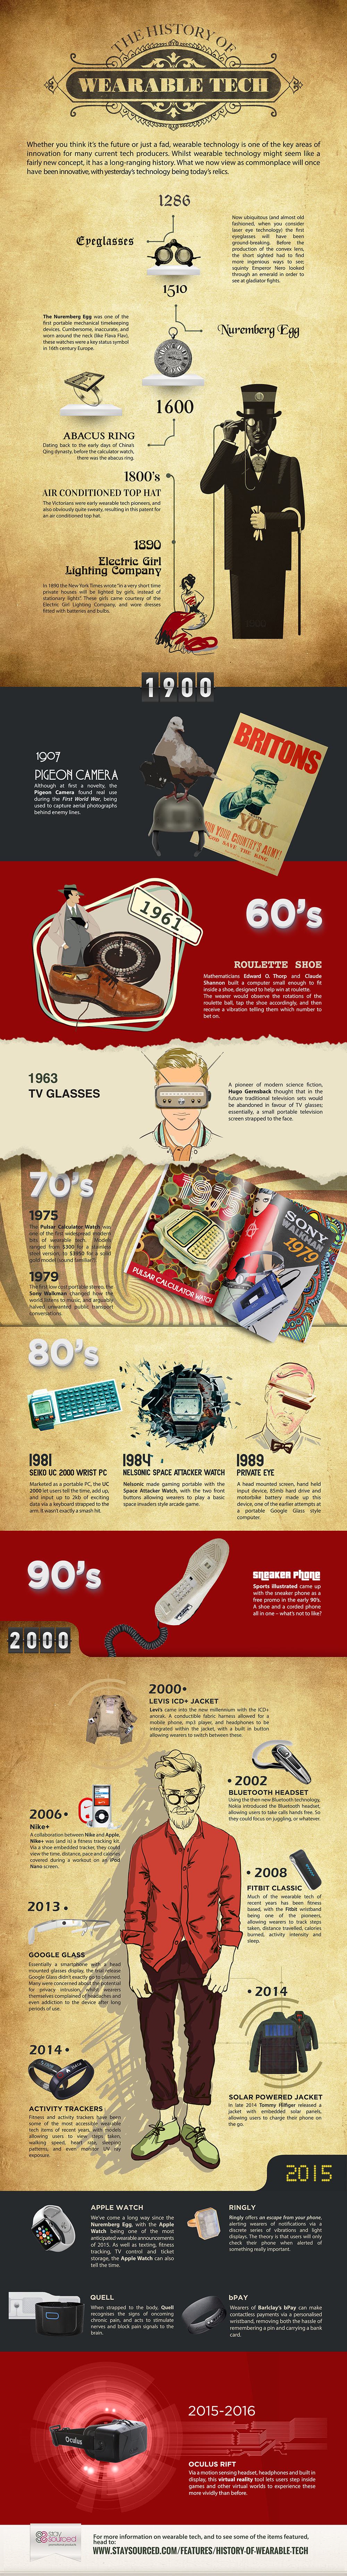  From http://www.staysourced.com/features/the-history-of-wearable-tech/ 